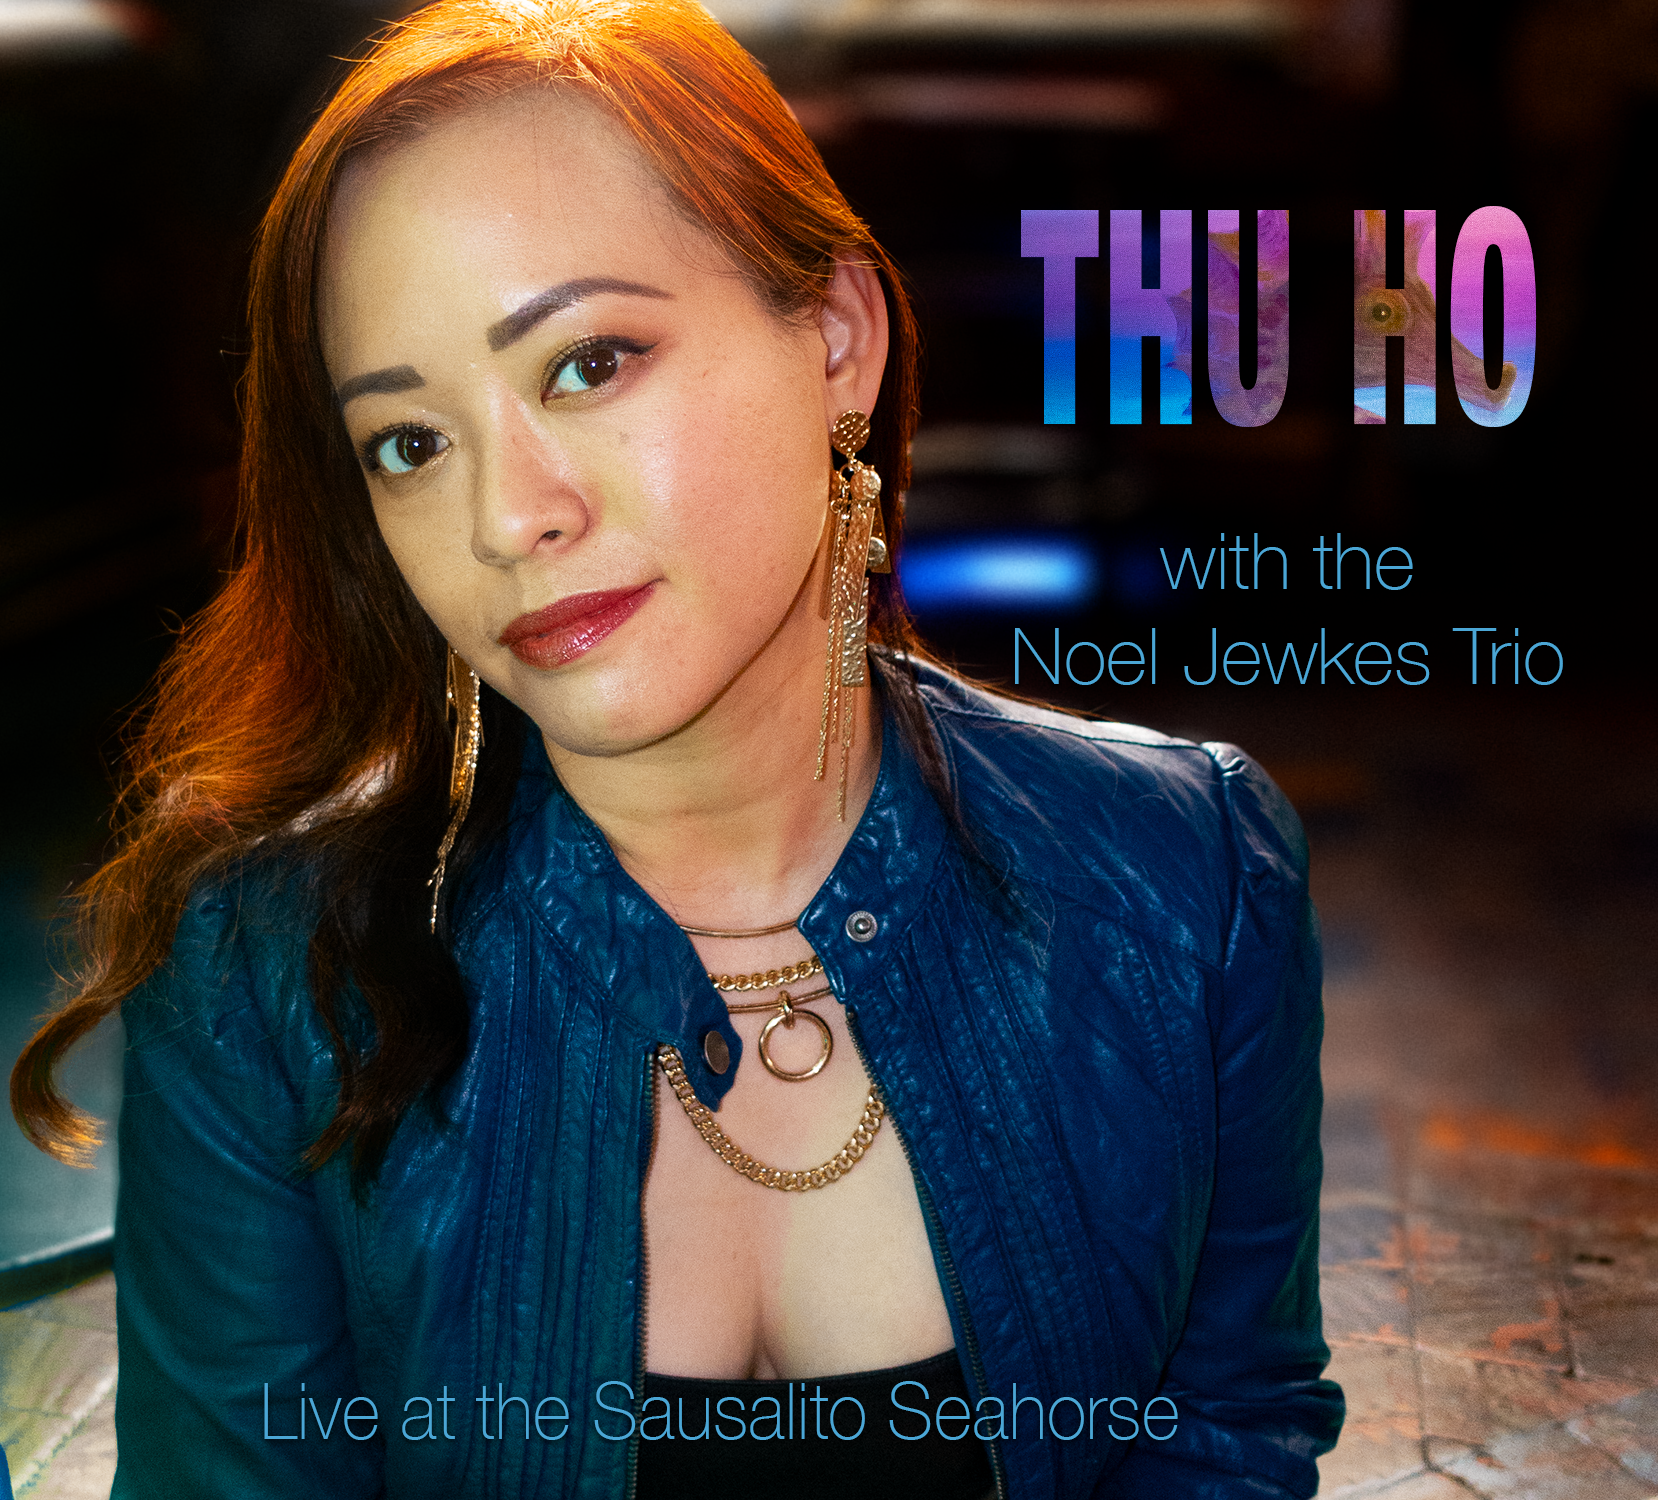 THU HO with the Noel Jewkes Trio. 